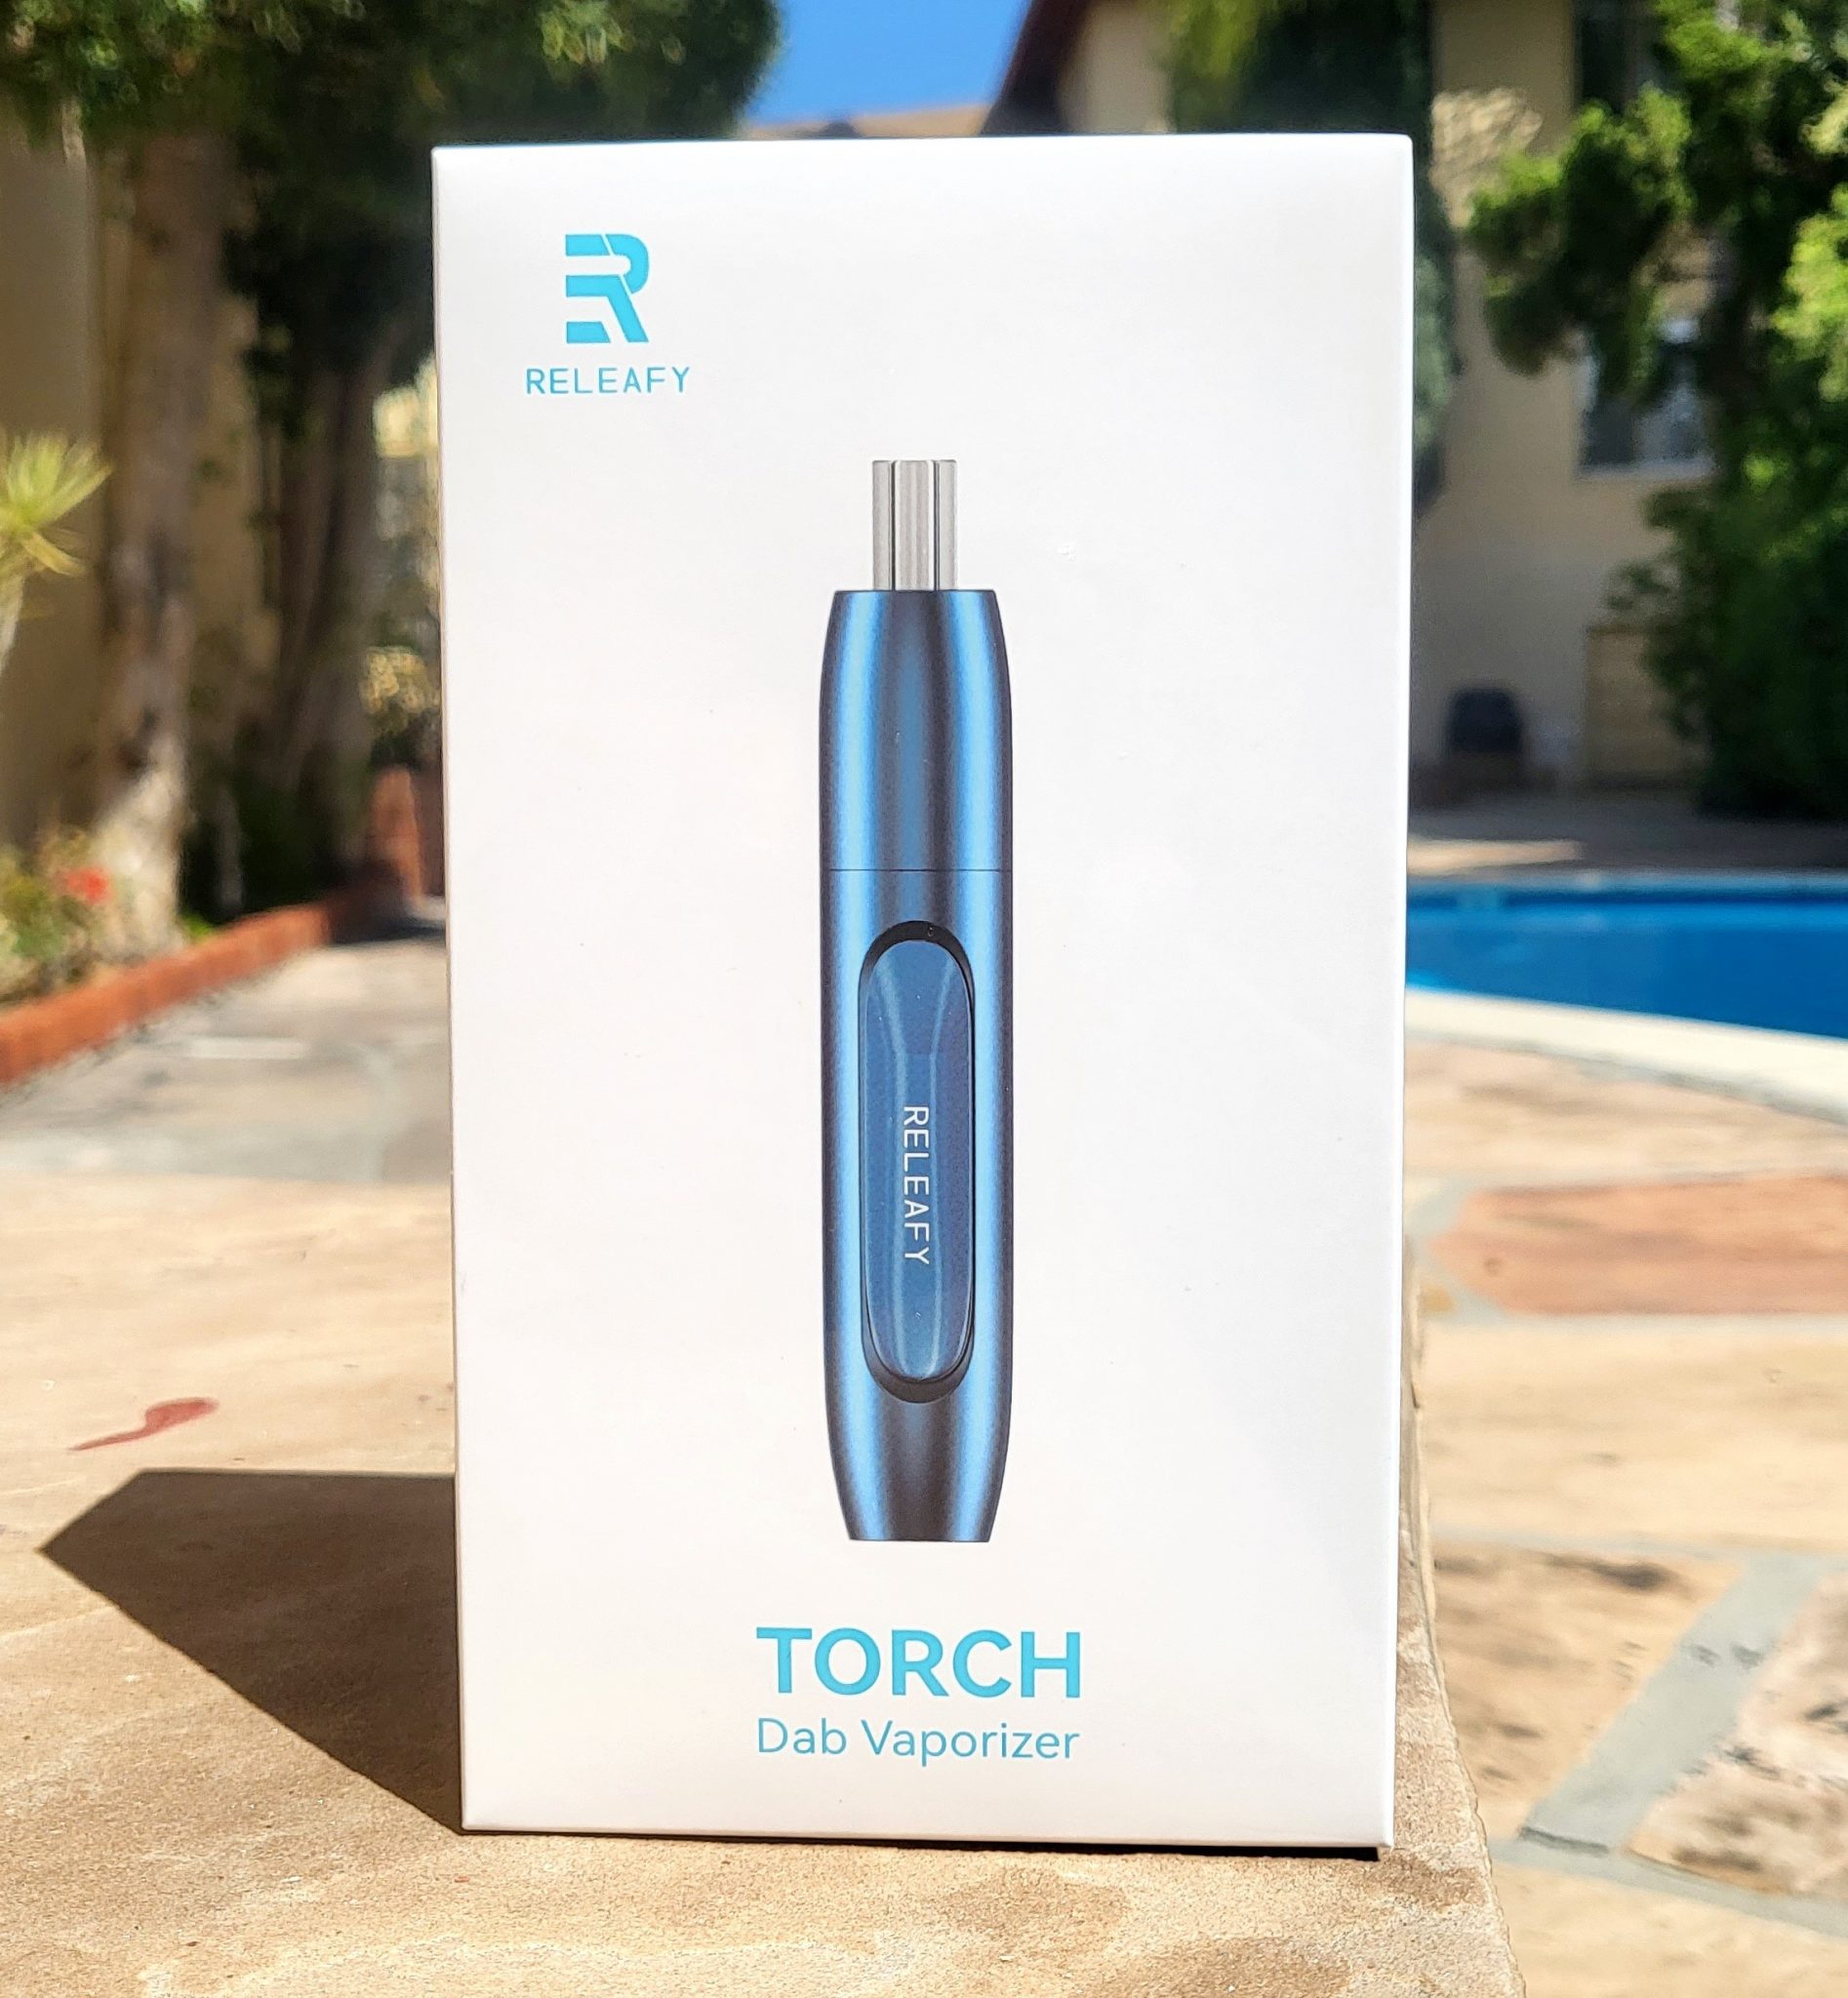 releafy torch front